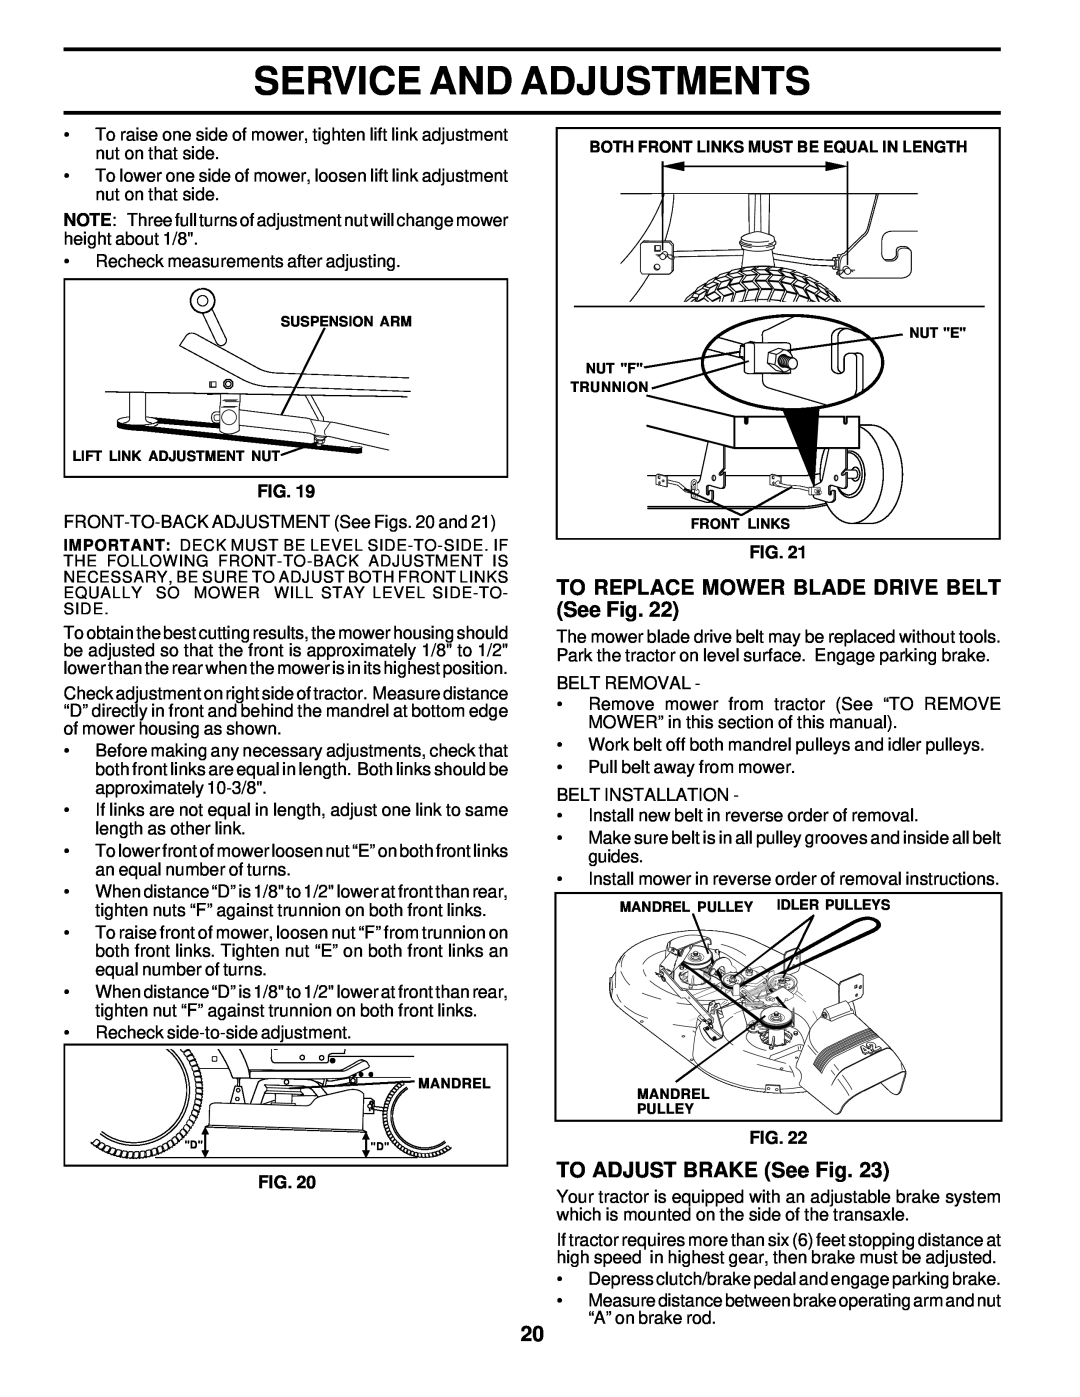 Poulan PO165H42A owner manual TO REPLACE MOWER BLADE DRIVE BELT See Fig, TO ADJUST BRAKE See Fig, Service And Adjustments 